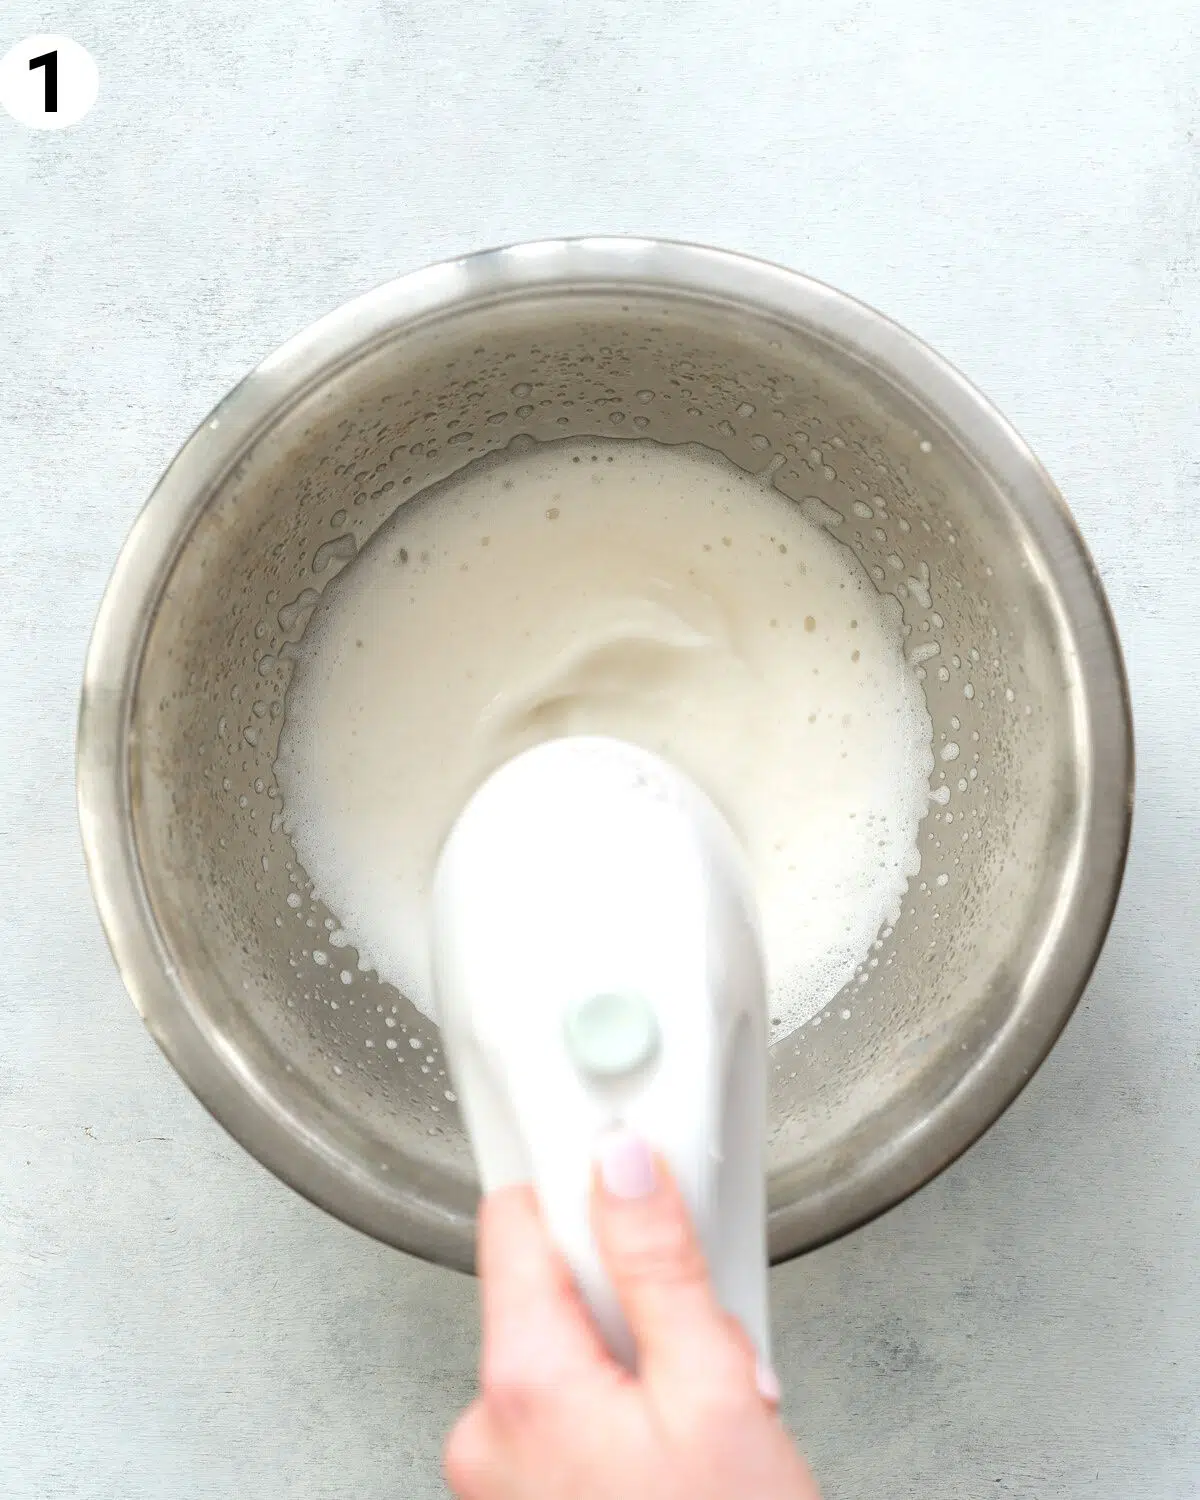 whisking aquafaba with an electric mixer.